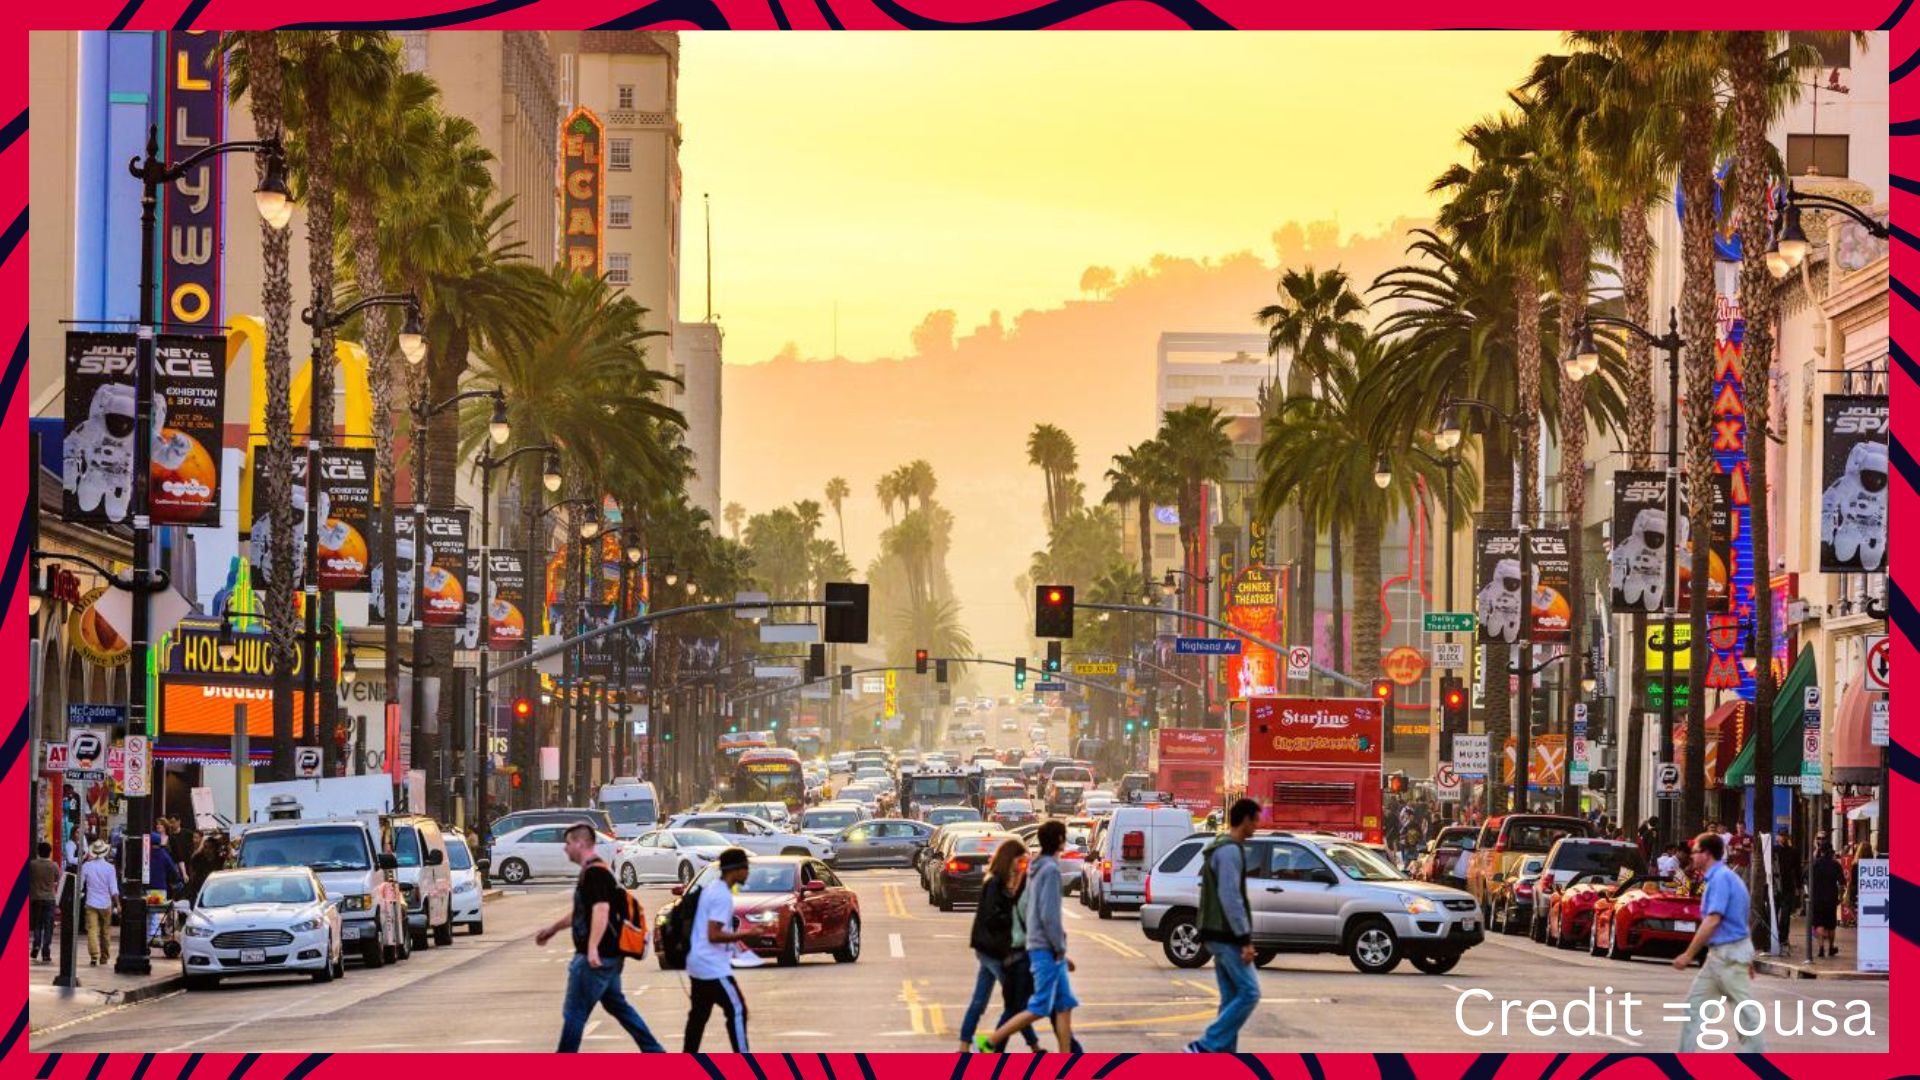 Los Angeles is the 3rd most popular city in America.